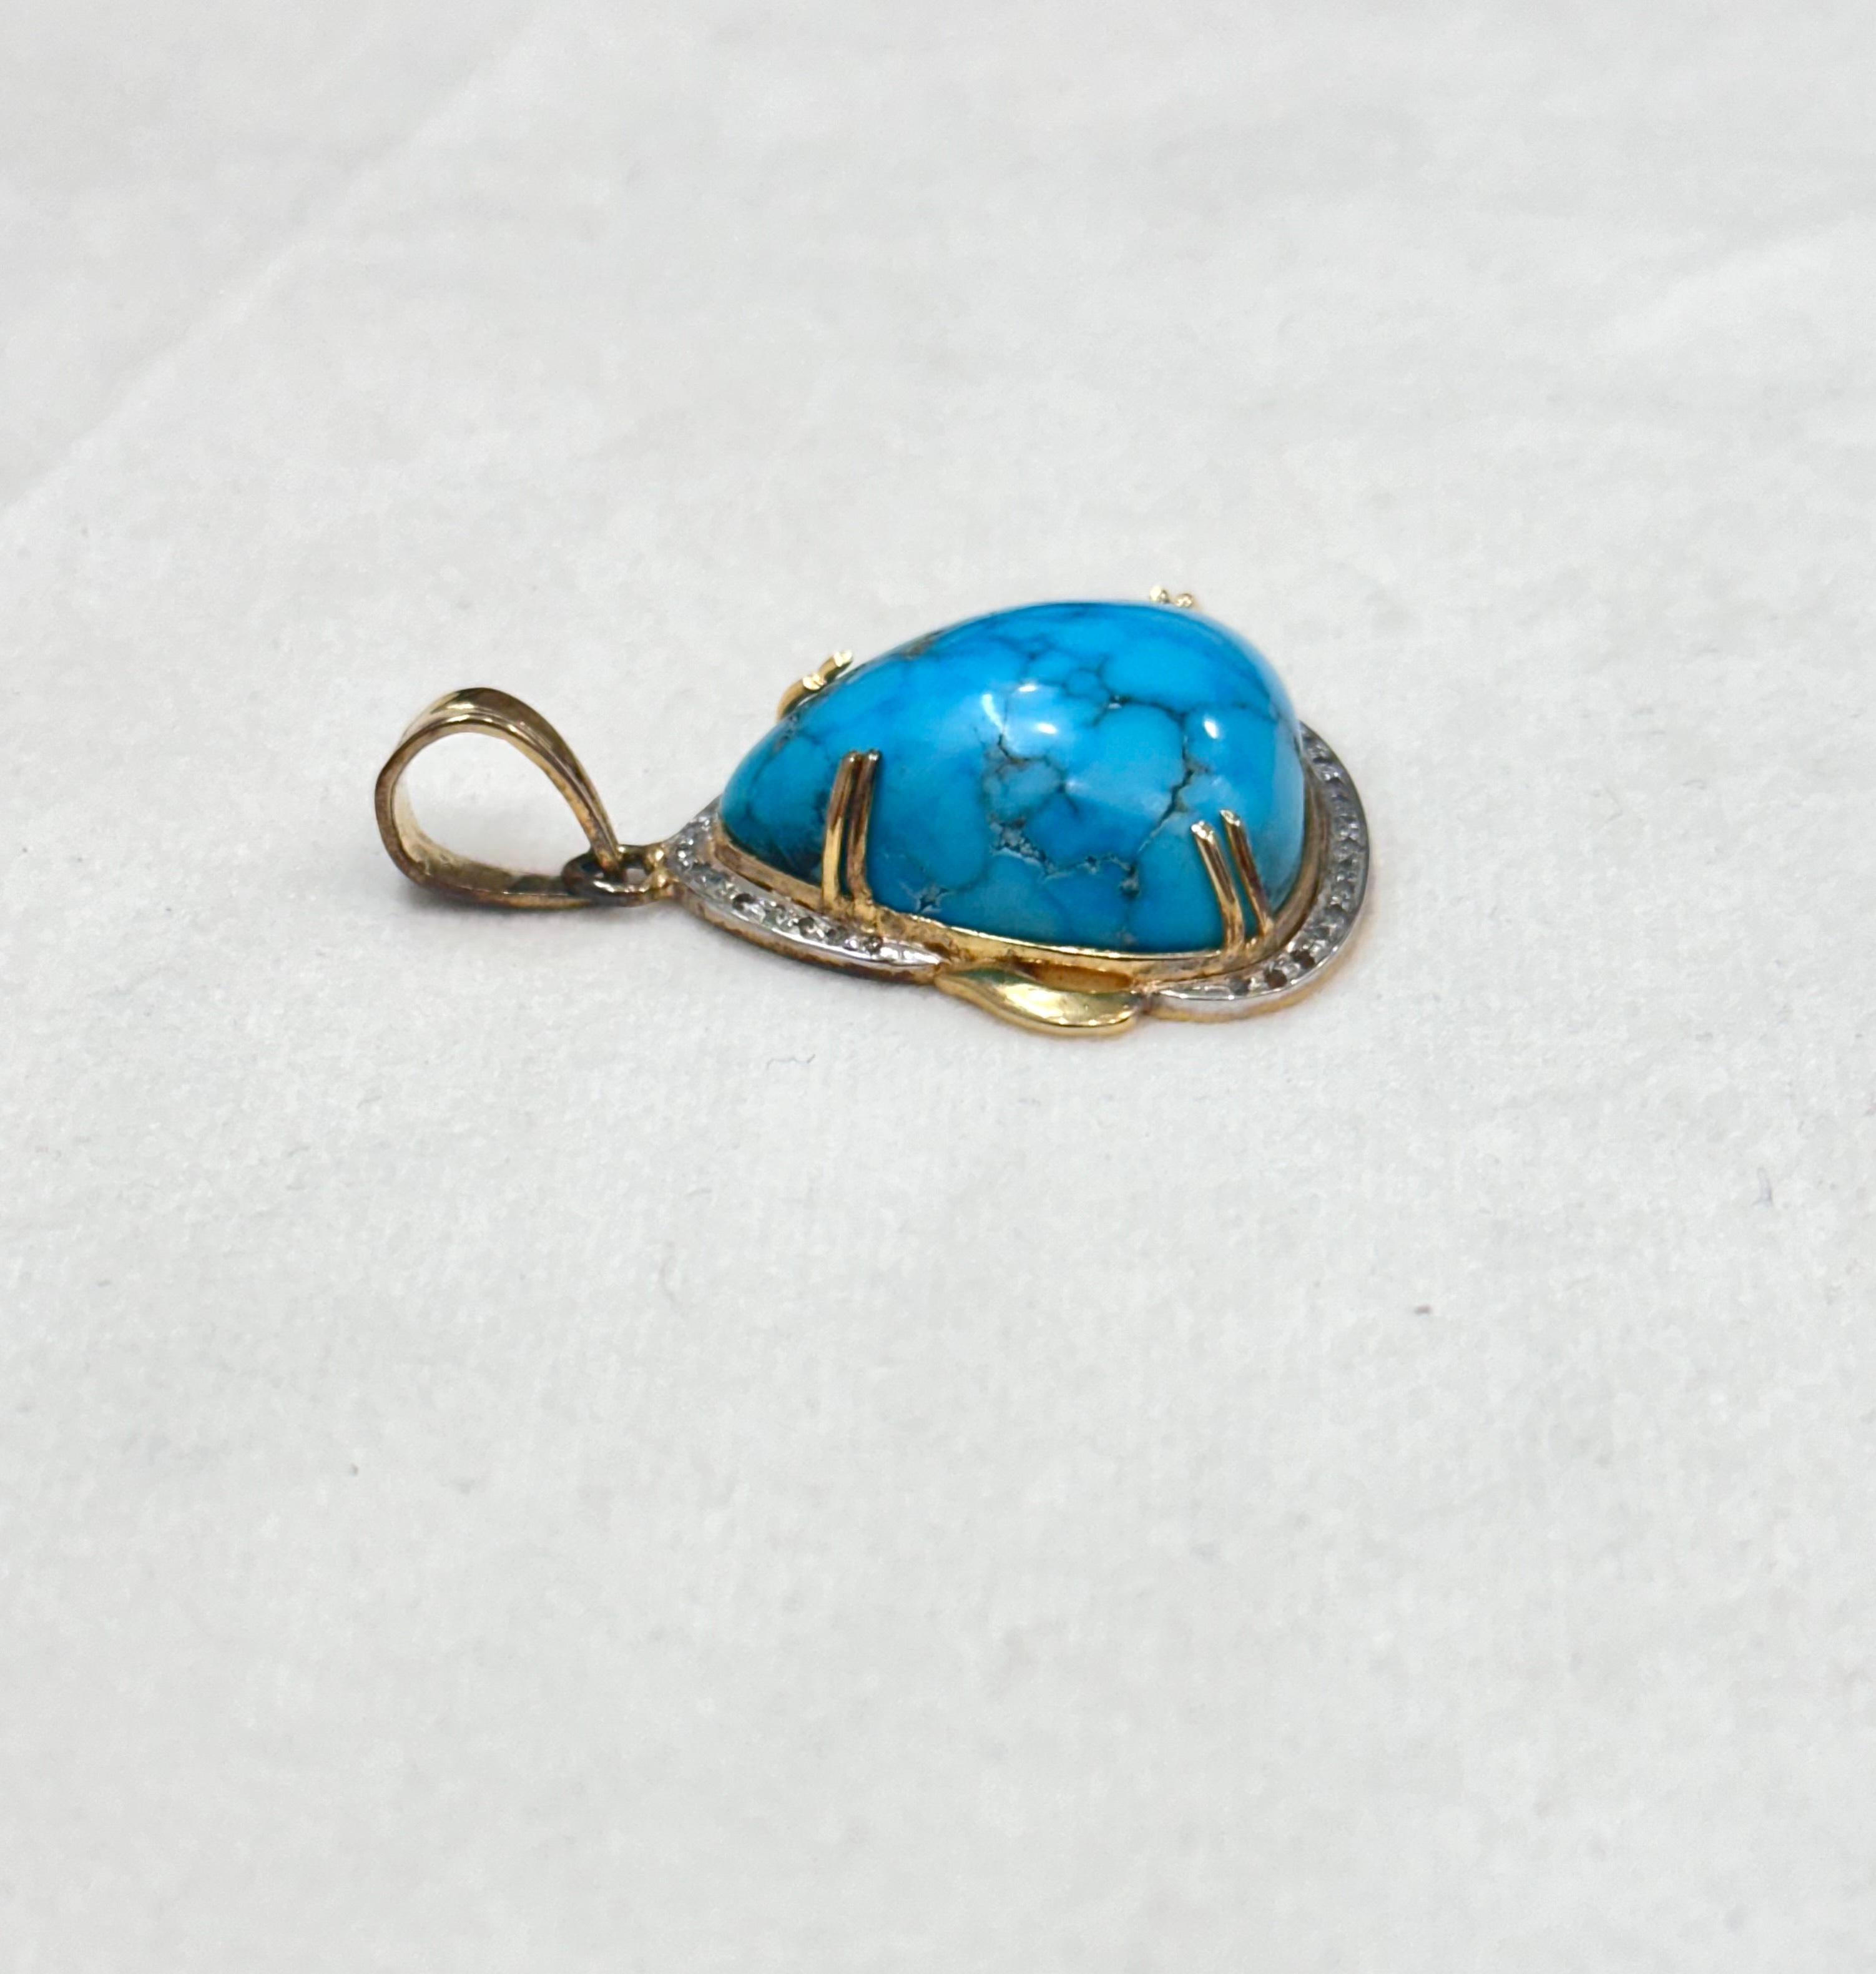 This is a beautiful turquoise stone set in 18K gold with pave diamonds. It consists of:

Gemstone- Natural turquoise
Gemstone origin- Iran
Metal- Solid Gold
Metal purity- 18K yellow gold
Diamond- Pave diamonds
Diamond origin- Natural

Dimensions:
